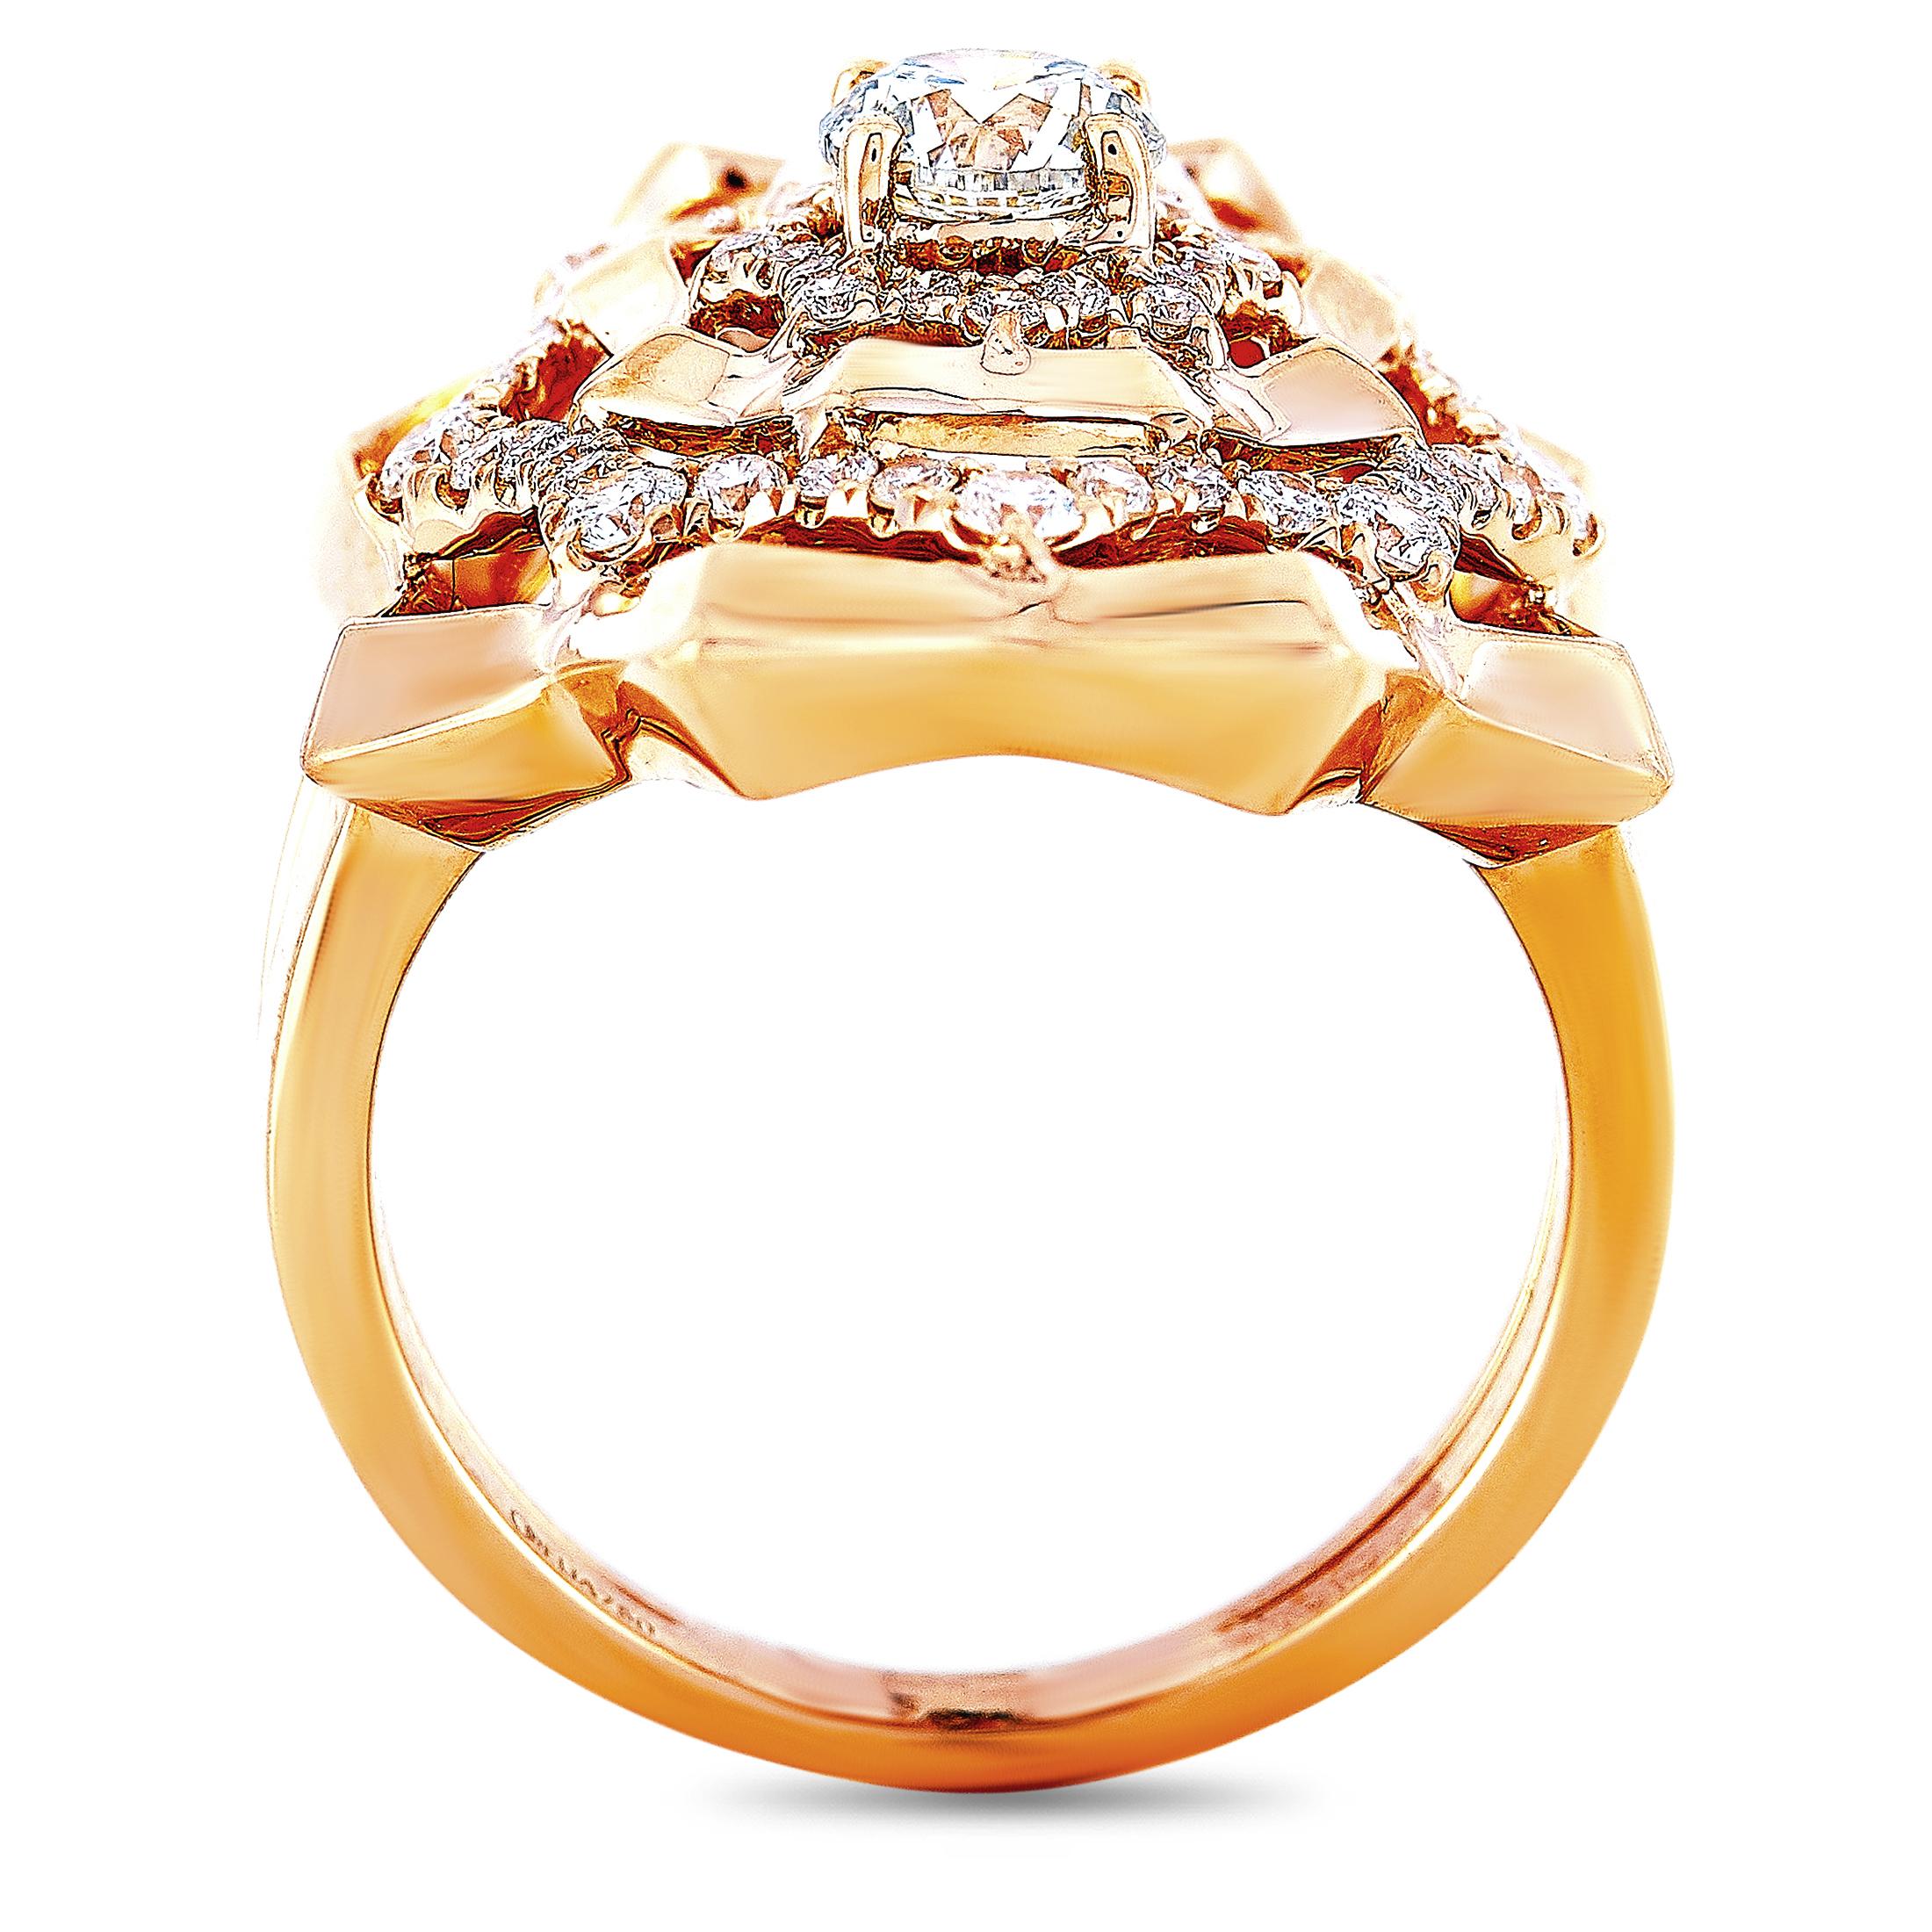 This LB Exclusive ring is made out of 18K rose gold and diamonds that total 1.15 carats. The ring weighs 9.1 grams and boasts band thickness of 3 mm and top height of 7 mm, while top dimensions measure 19 by 26 mm.

Offered in brand new condition,